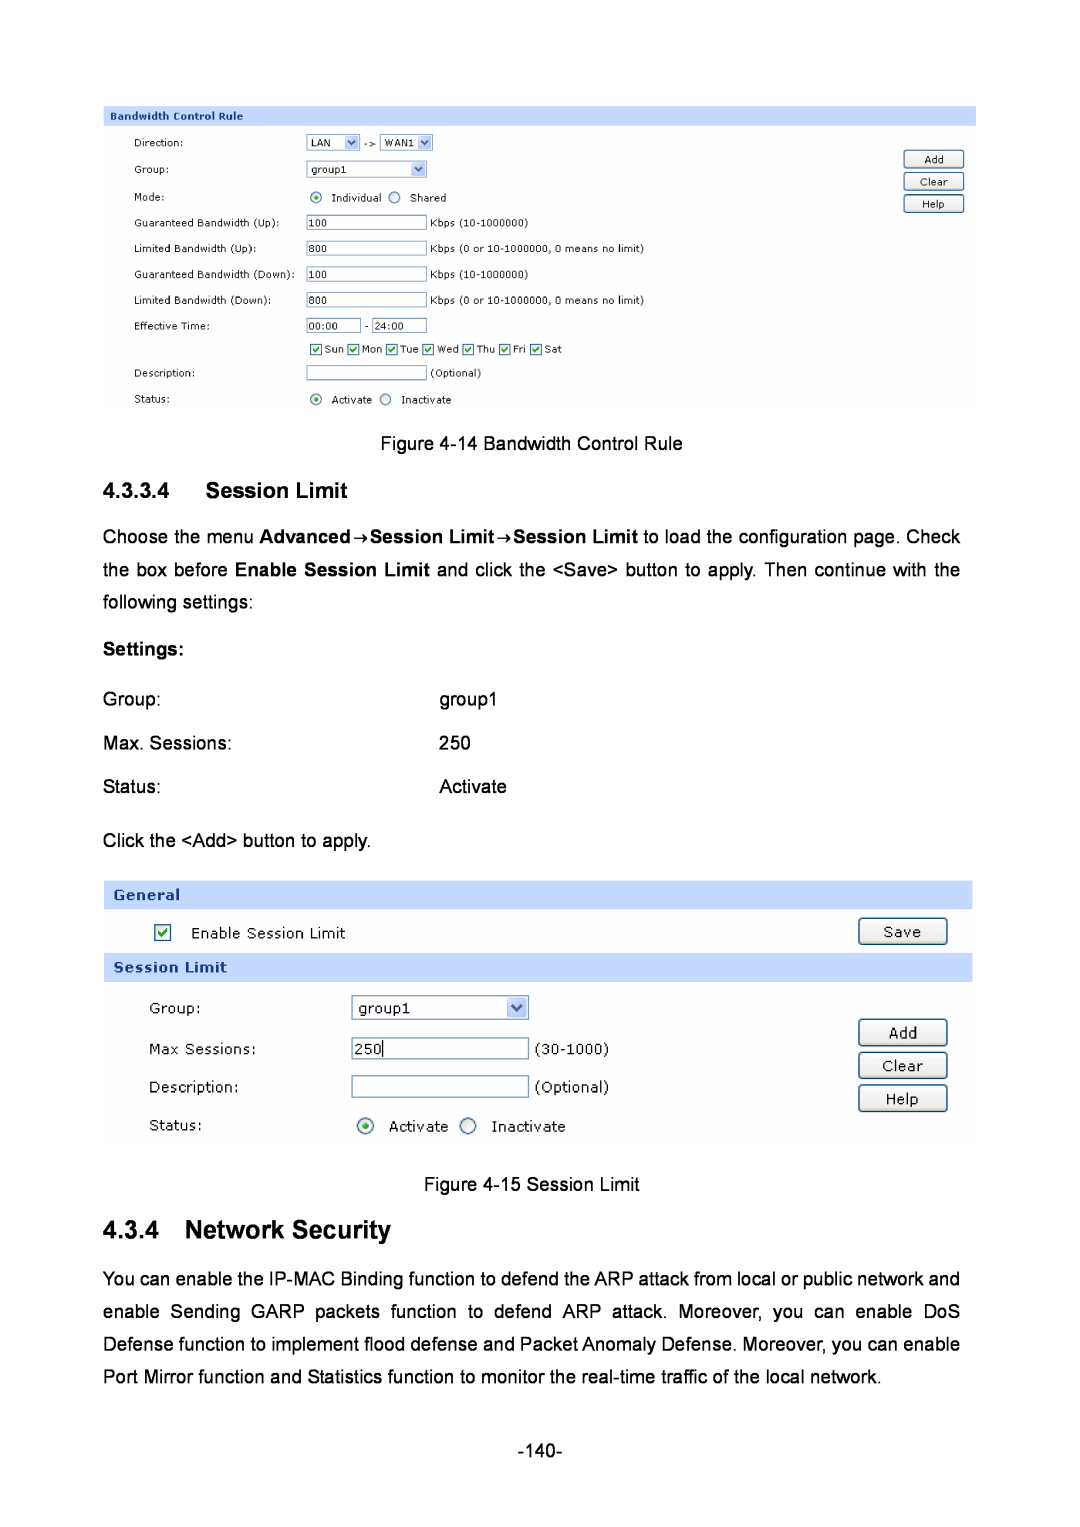 TP-Link TL-ER6020 manual Network Security, Session Limit, Settings 